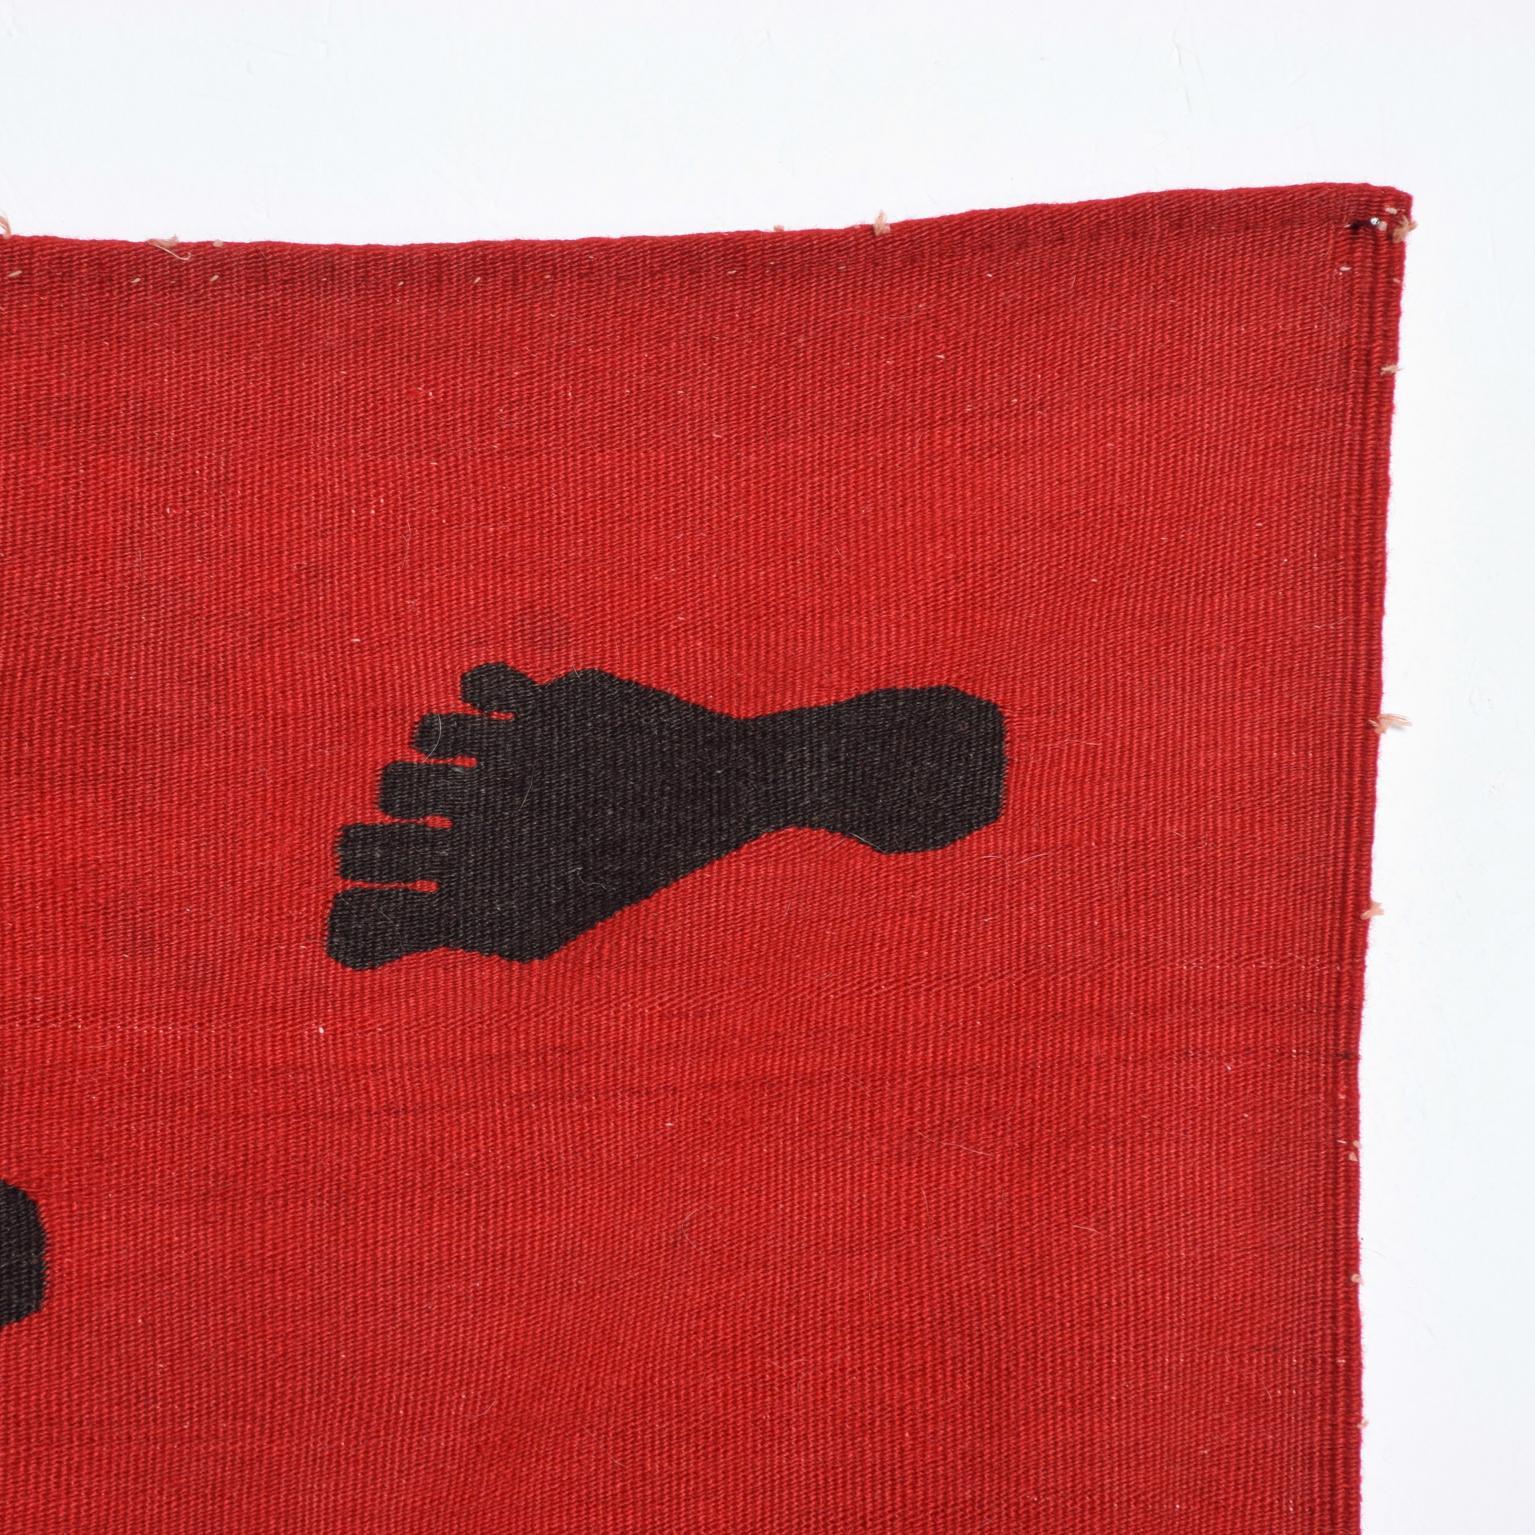 For your pleasure: Modern wall art tapestry in the style of Pedro Friedeberg and mid-century textile designer Cynthia Sargent.
A Black foot on red background in wool.
The  Dimensions: 76 1/2